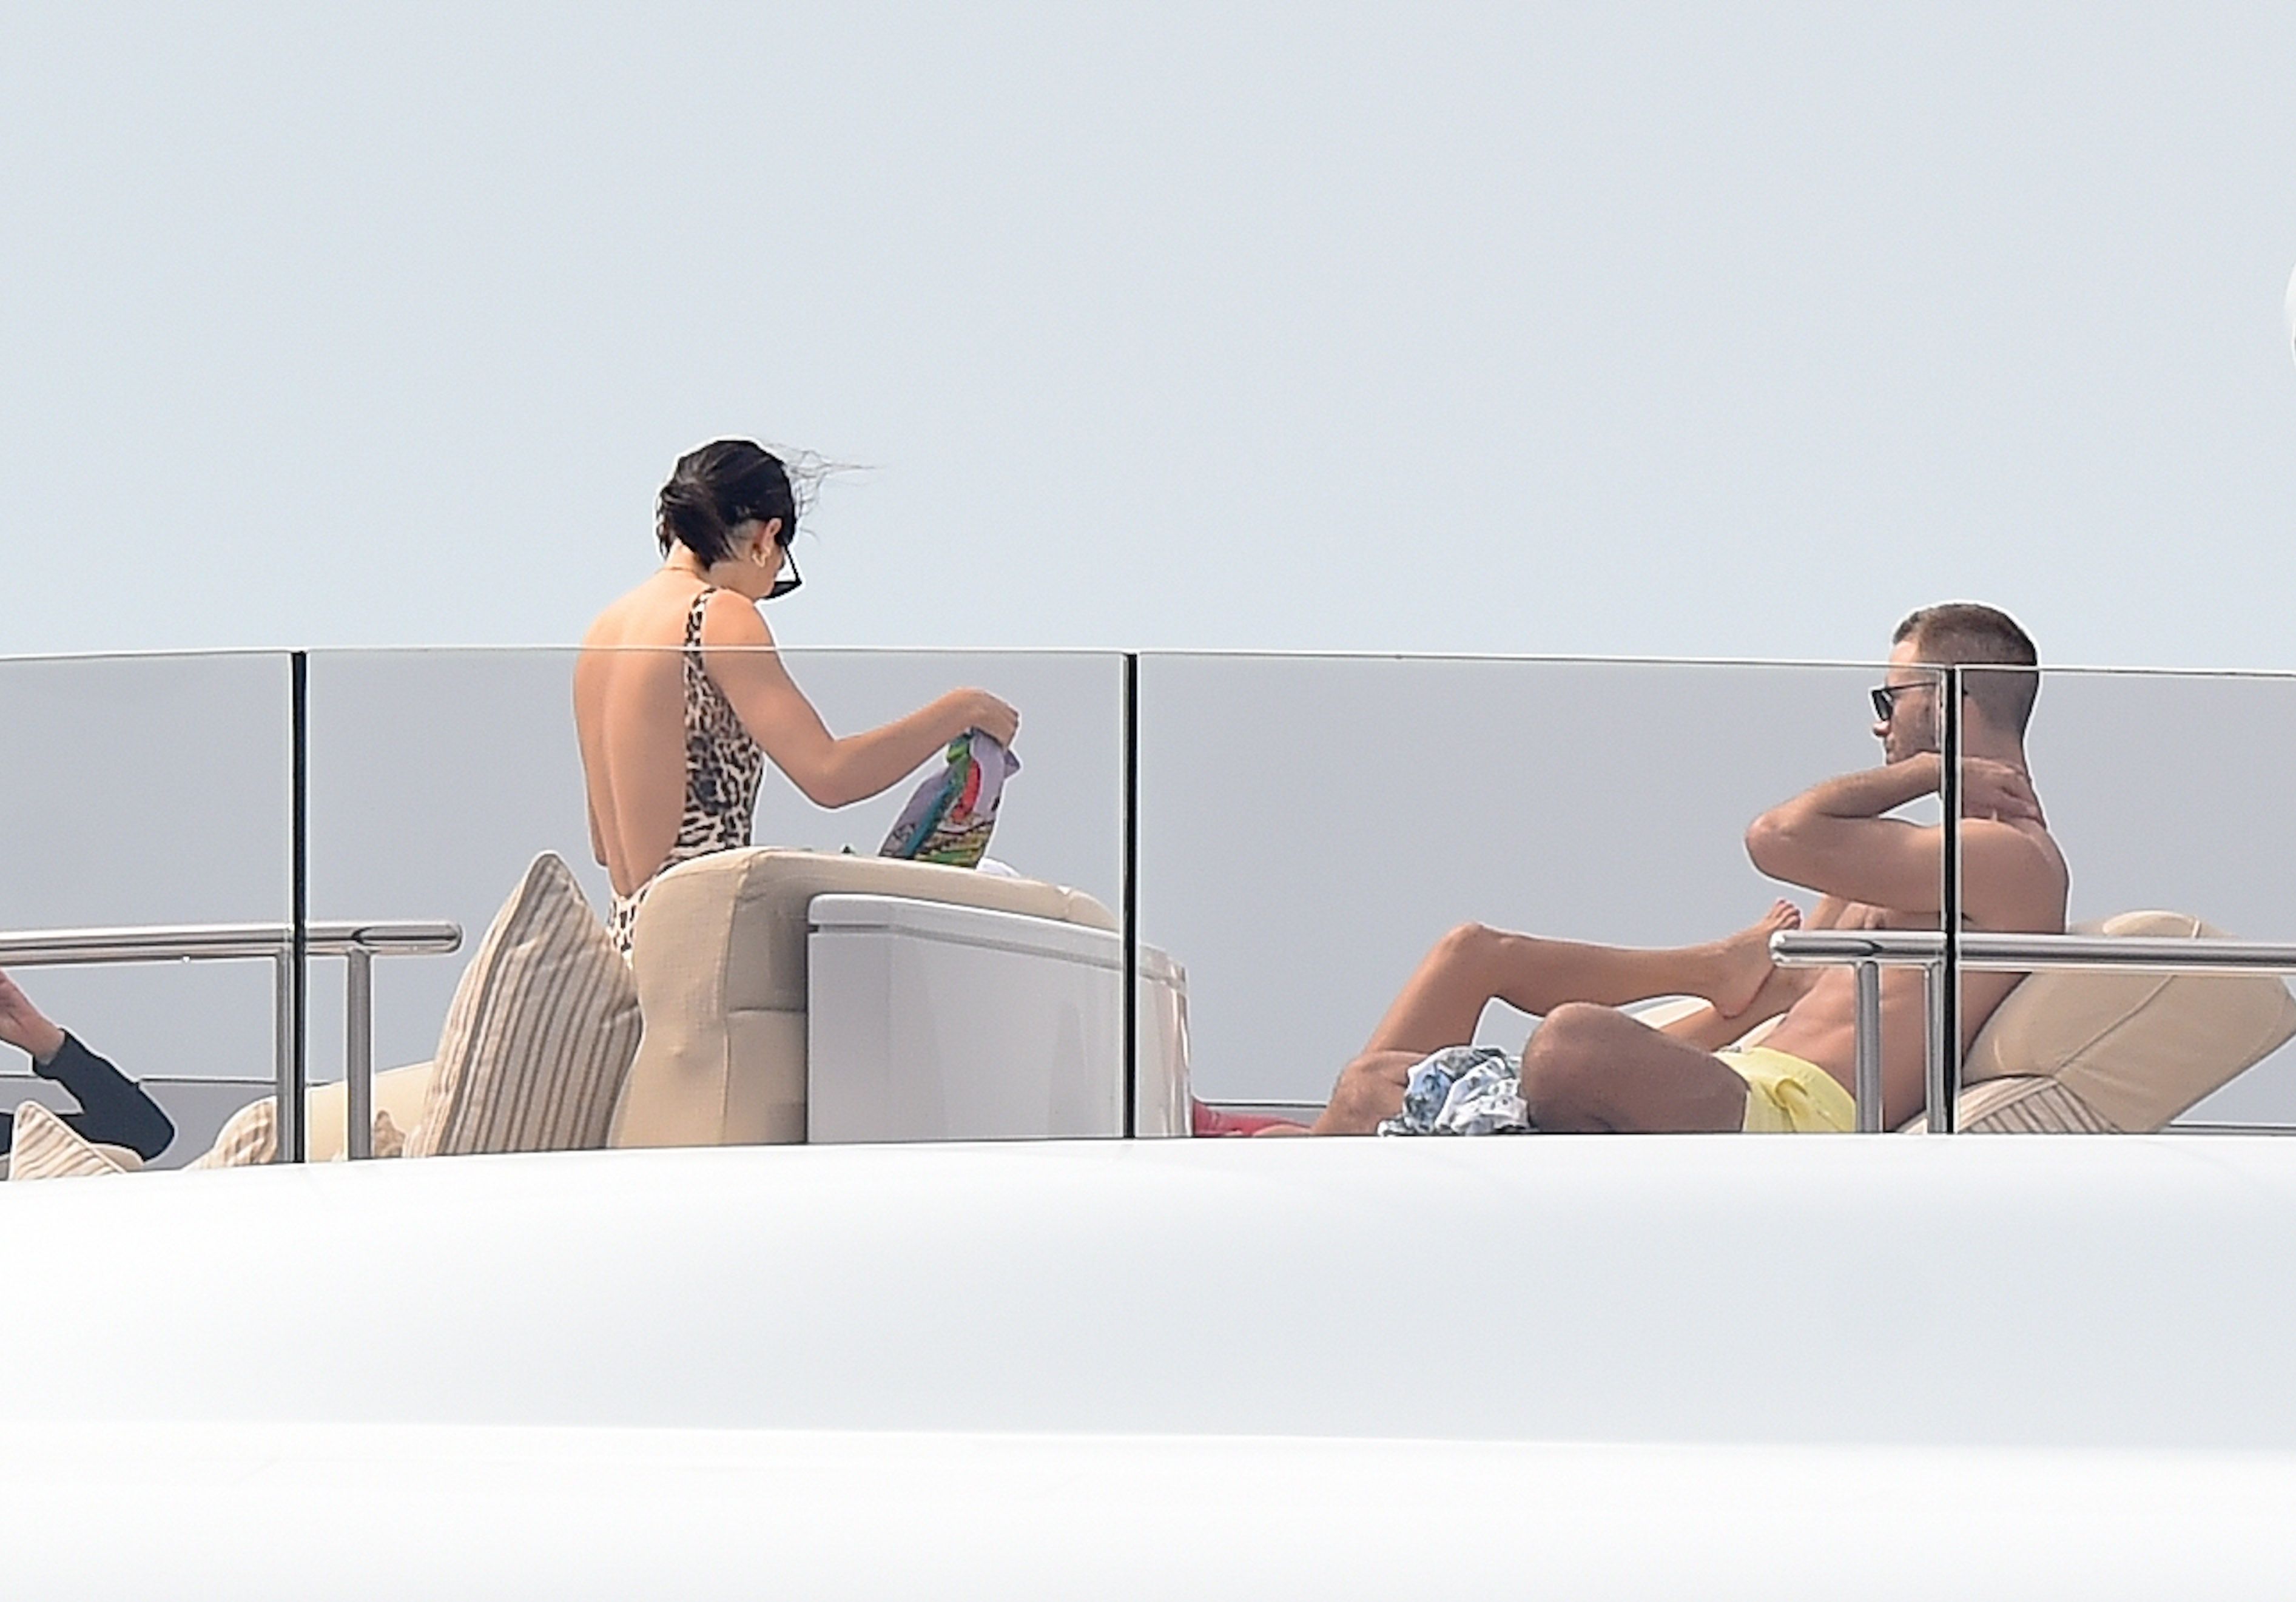 Kendall Jenner sexy swimsuit candids on a yacht in Antibes 198x MixQ photos 67.jpg